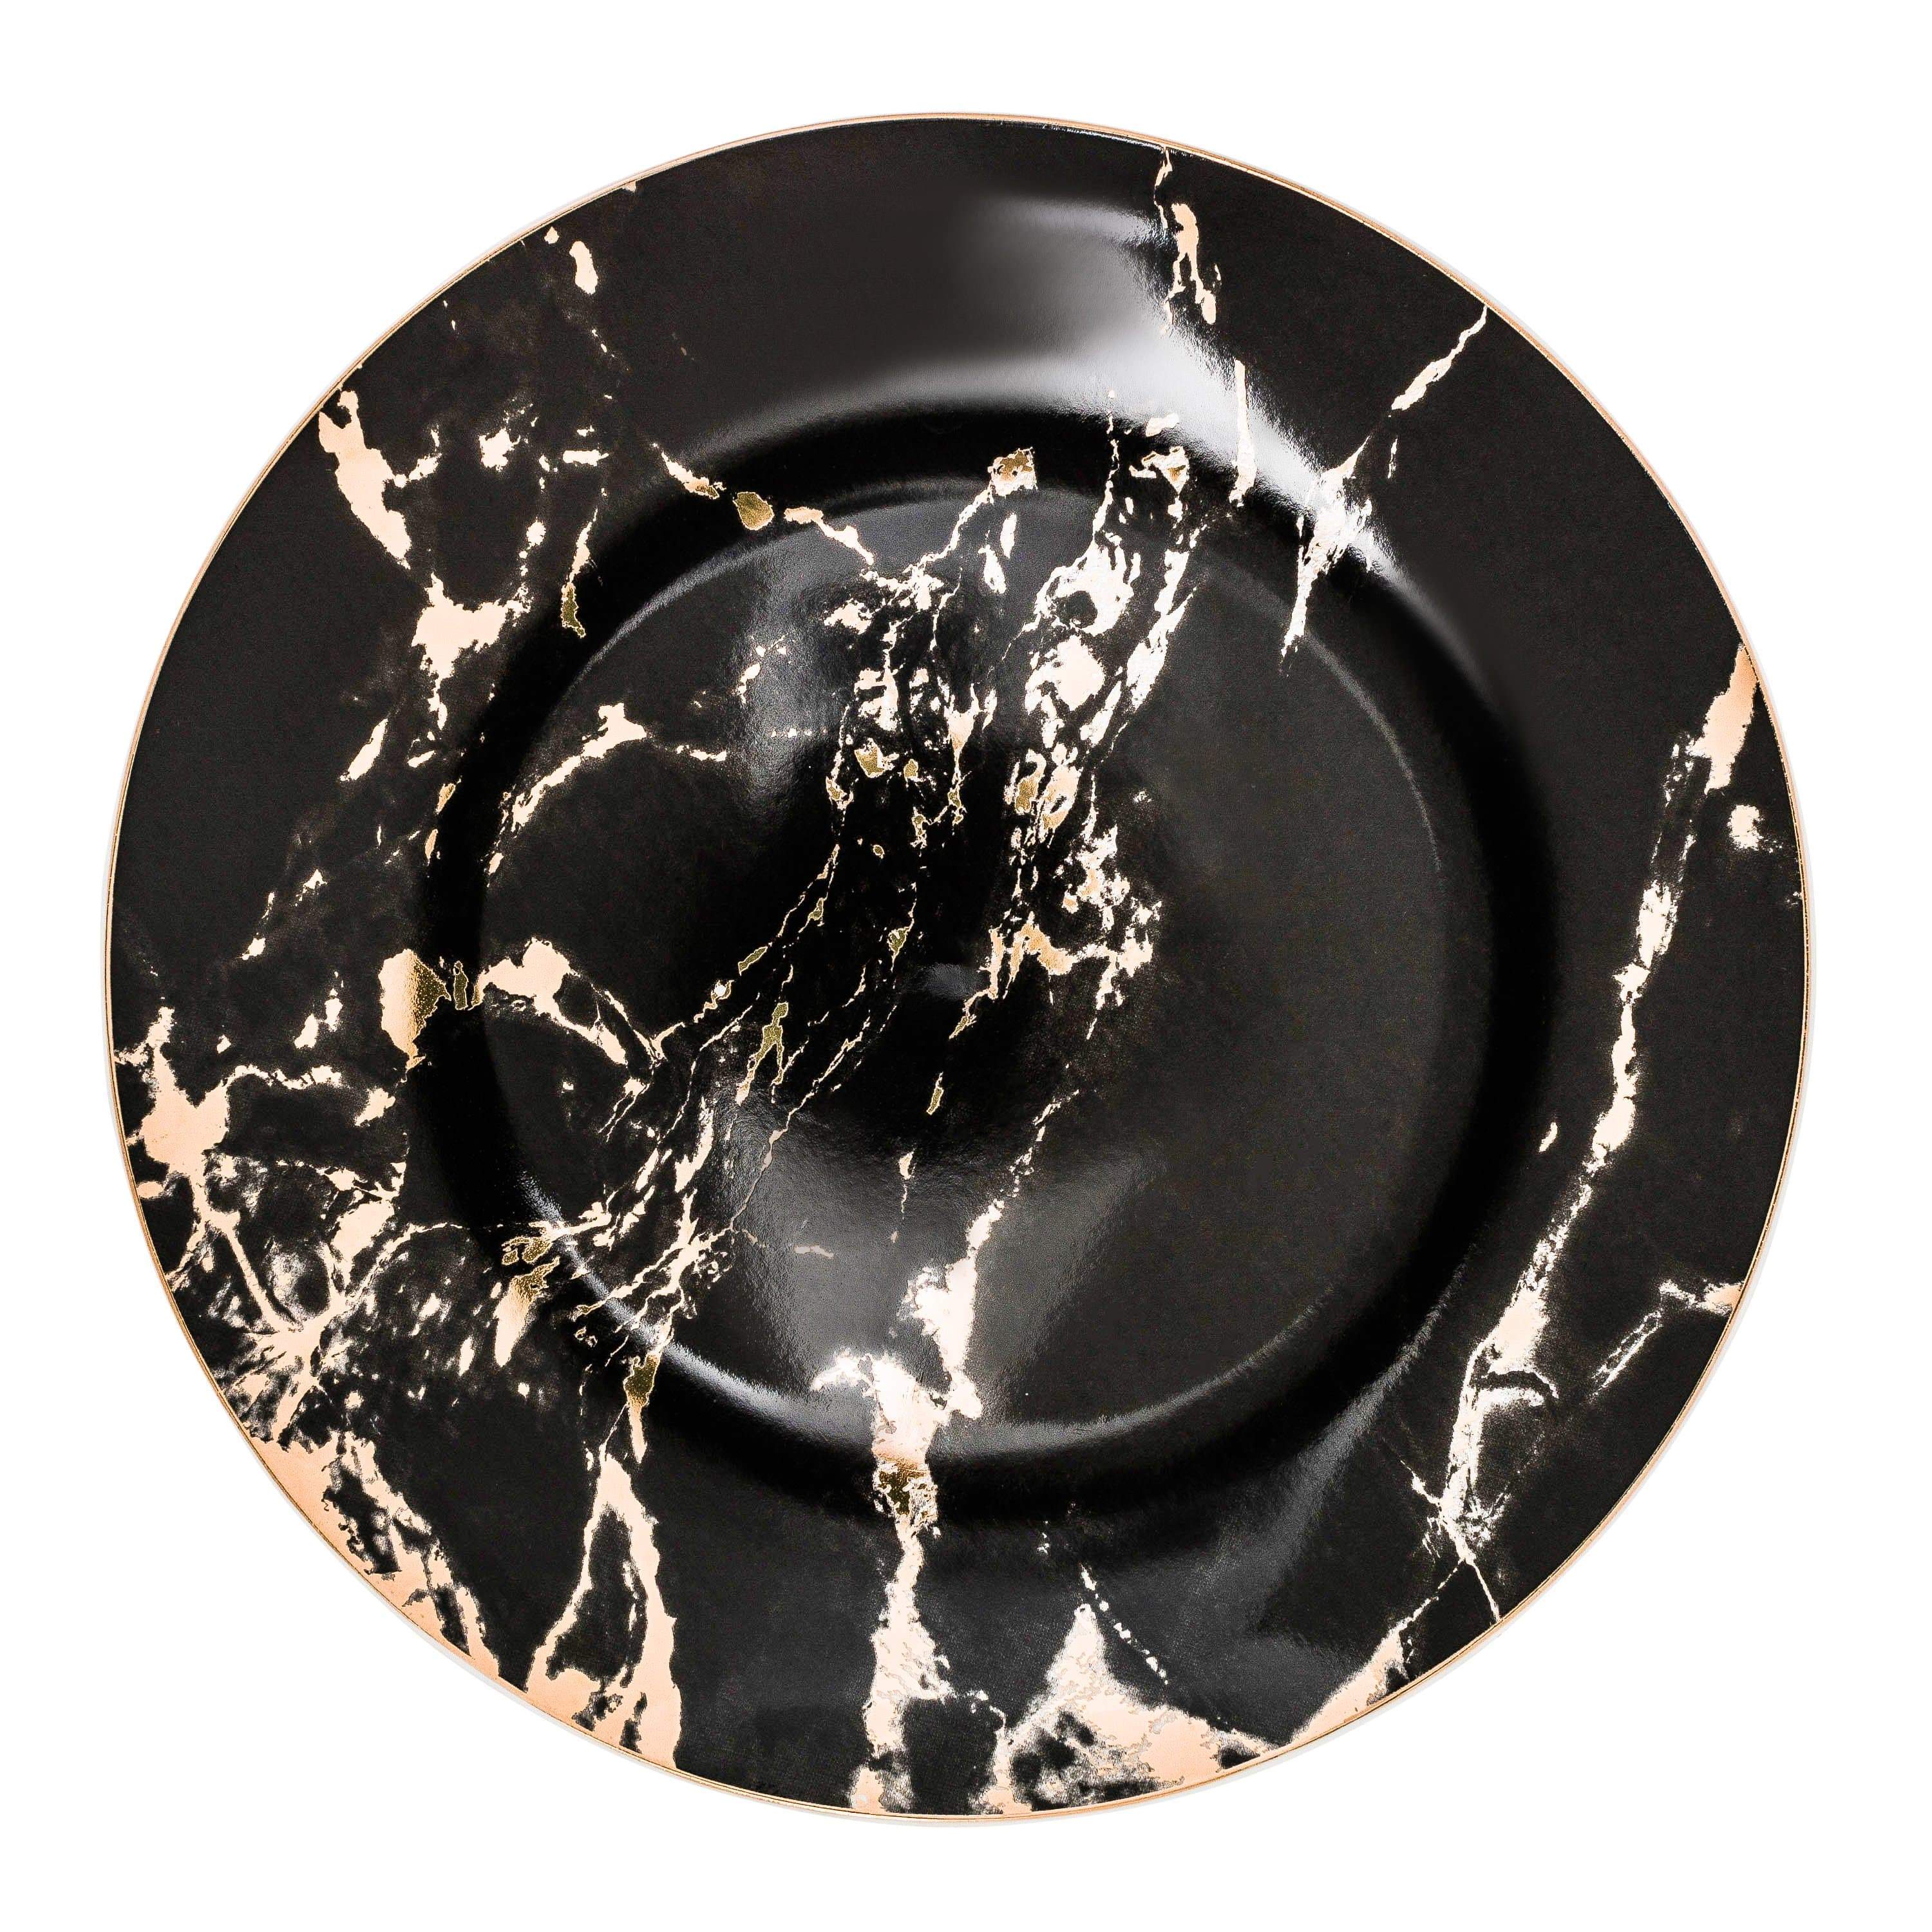 Michelangelo Plate Collection - Nordic Side - best-selling, bis-hidden, dining, plates